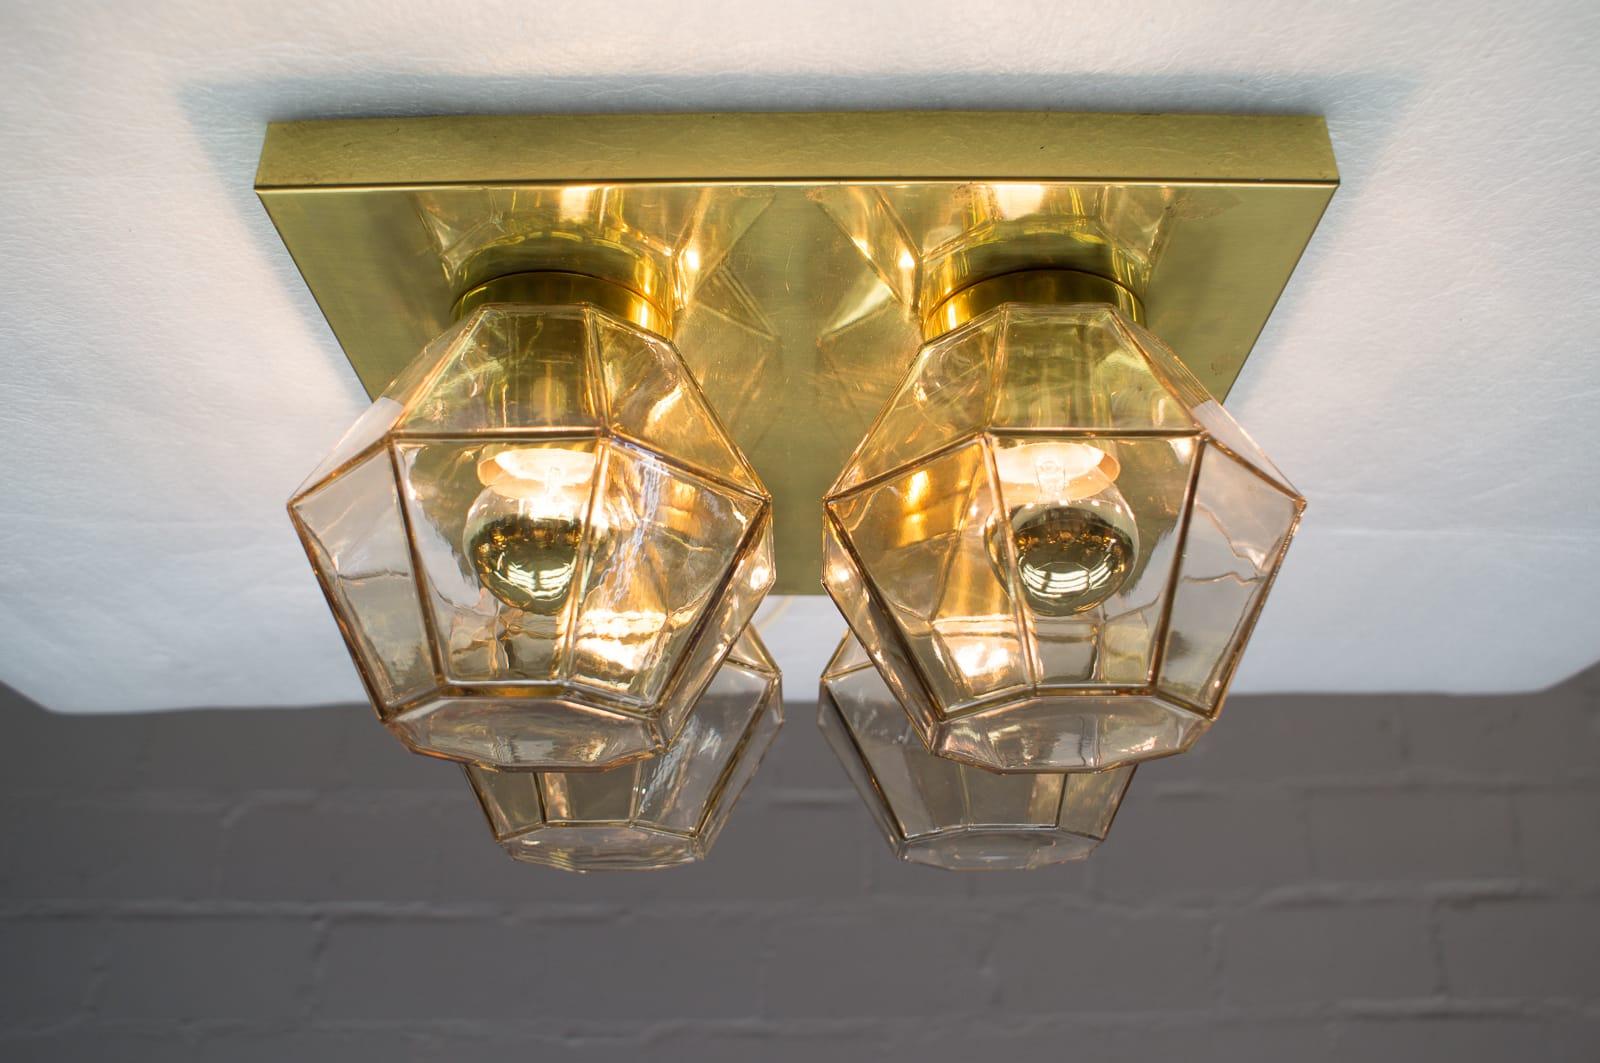 Mid-20th Century Geometric 4-Light Limburg Brass and Glass Wall or Ceiling Lamp, Germany, 1960s For Sale